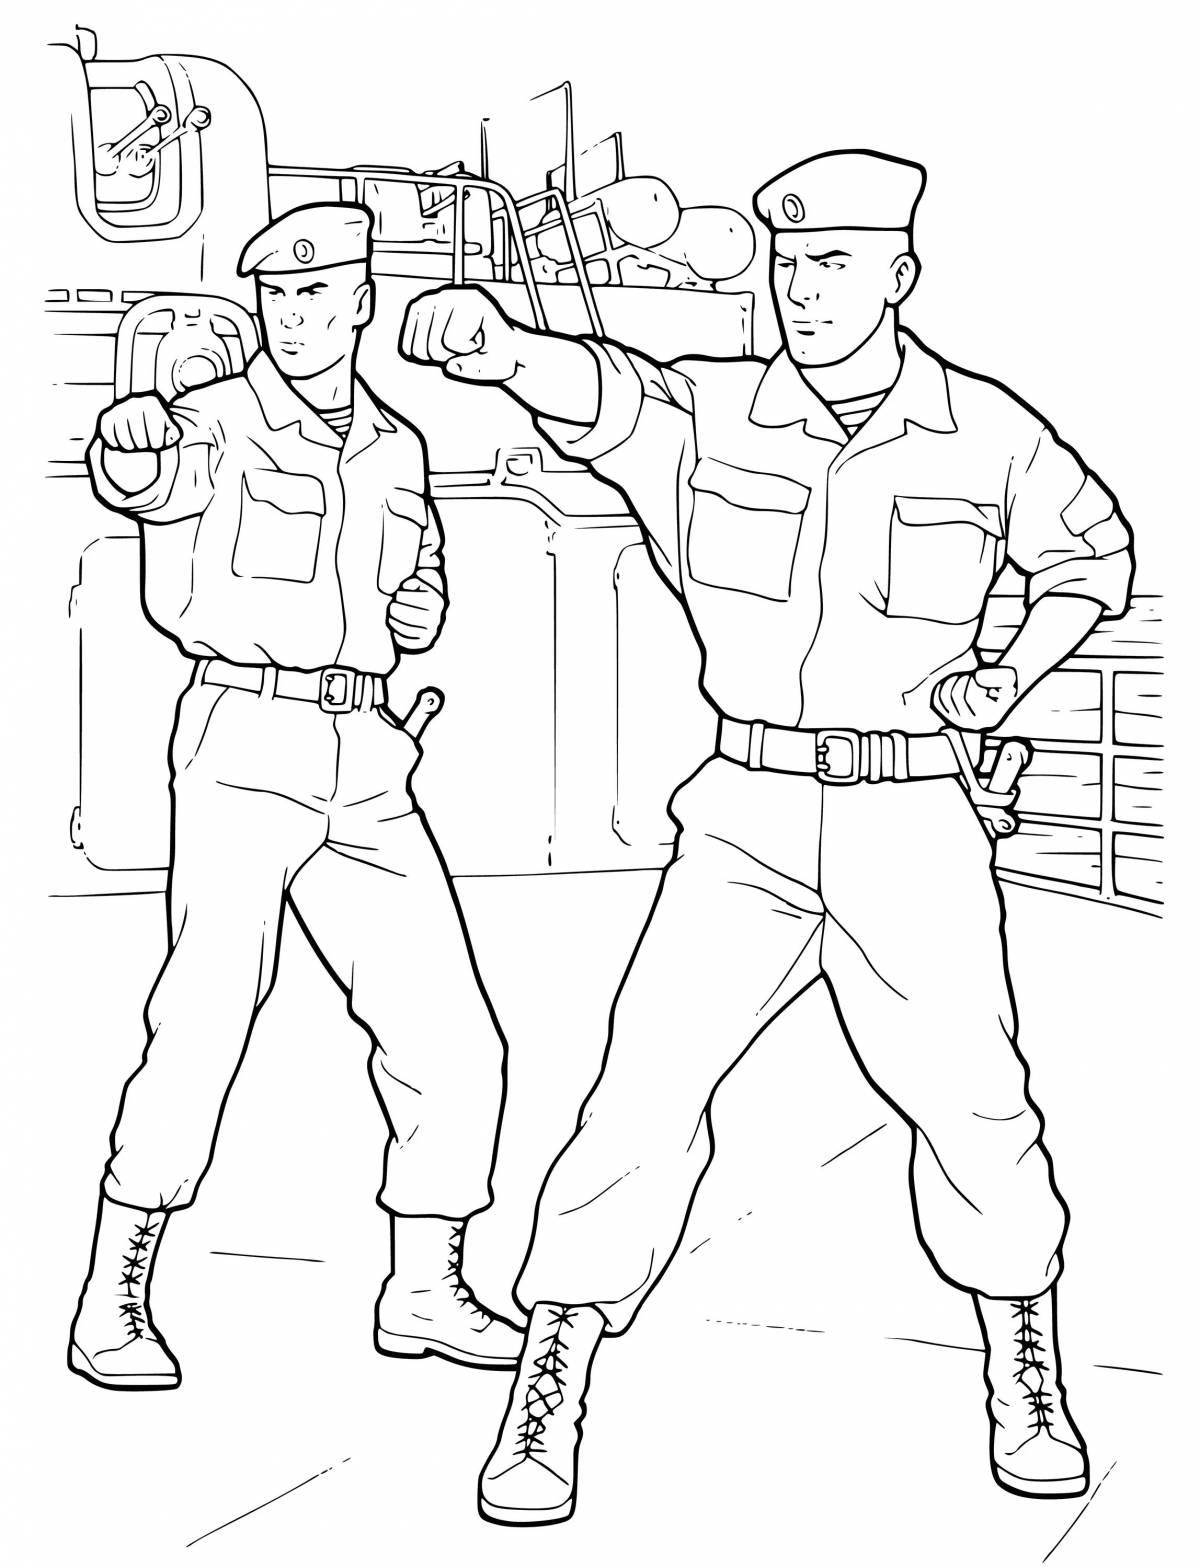 Adorable modern soldier coloring book for kids